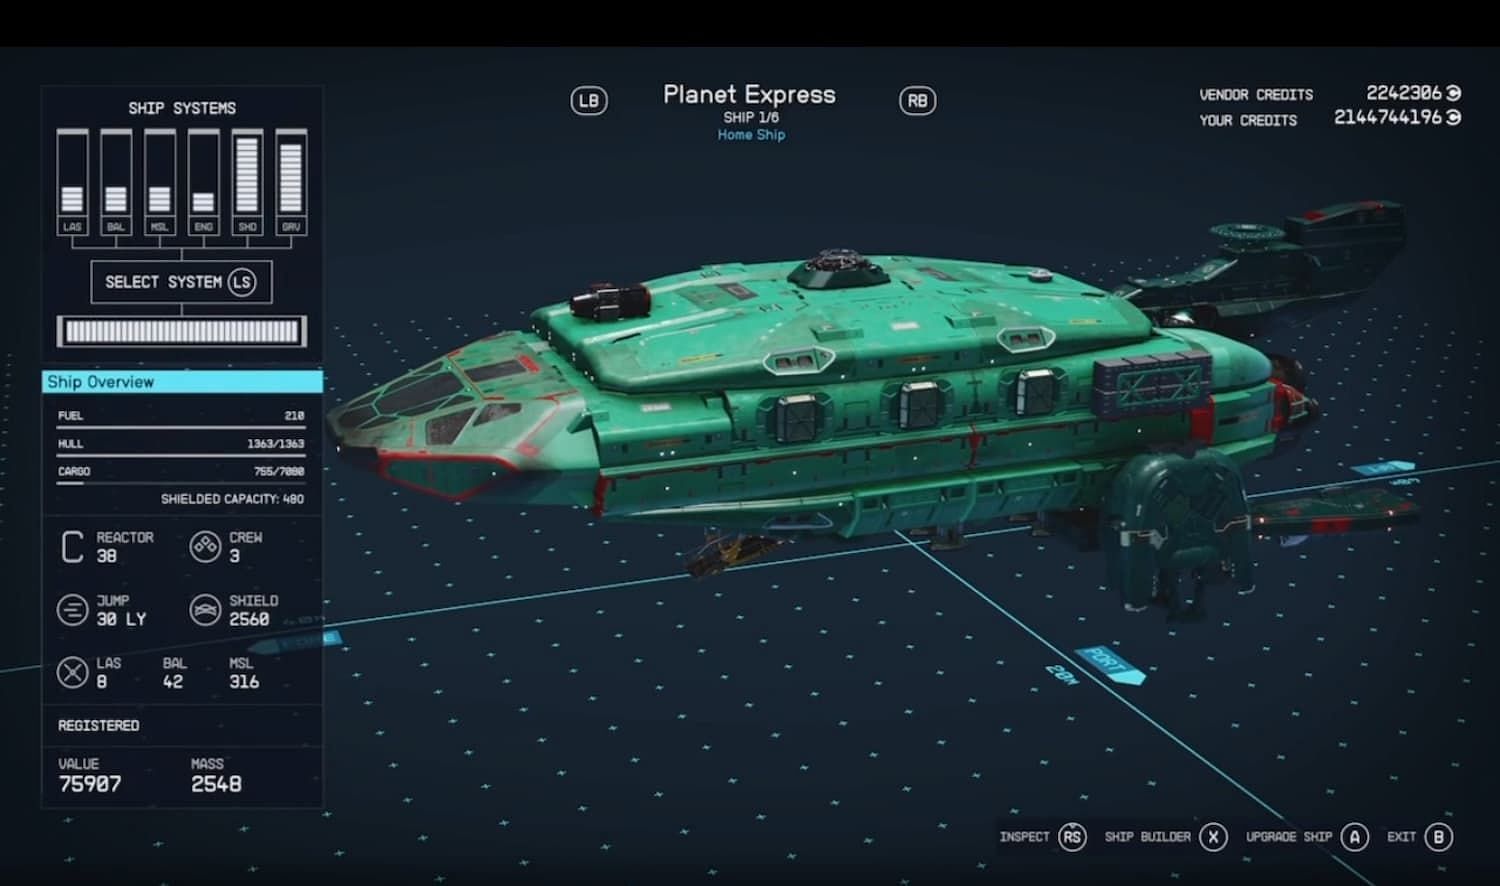 Starfield Futurama spaceship guide: Parts, colors, and more